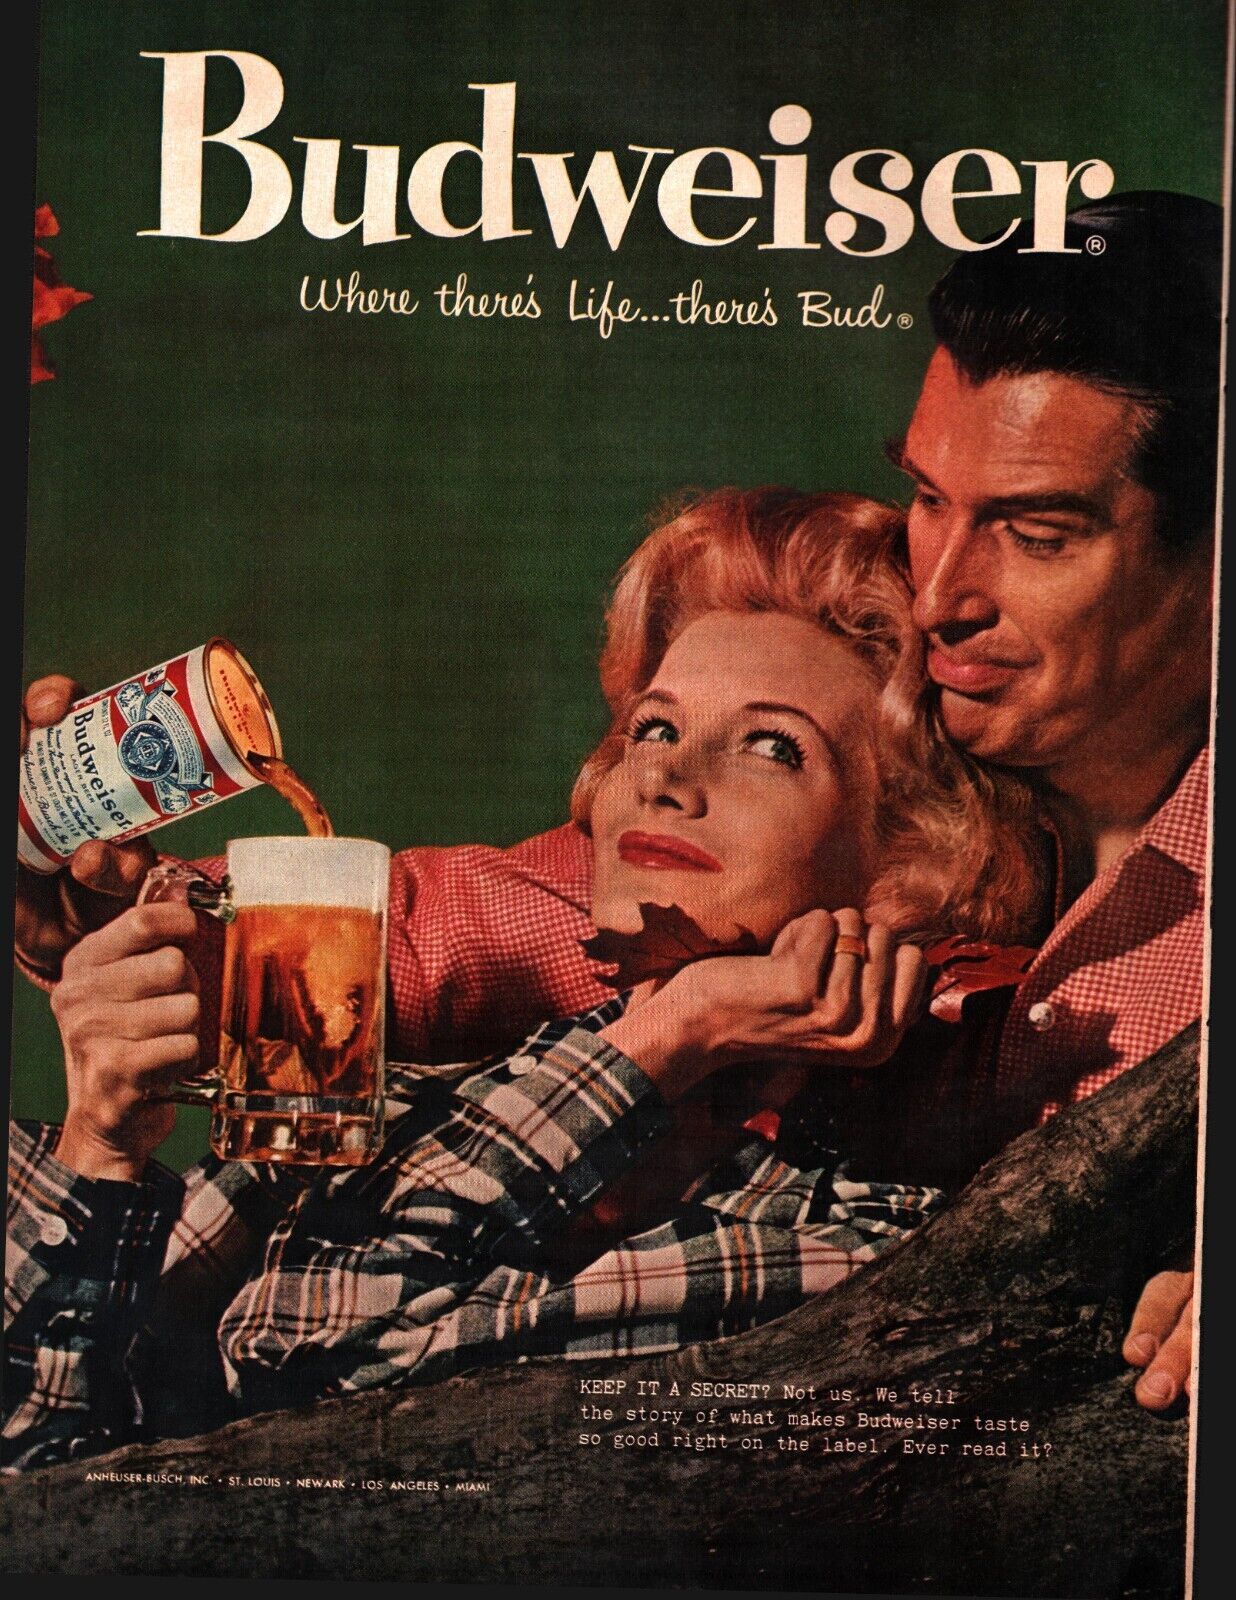 1958 Budweiser Bud Beer Brewery Vintage Print Ad Anheuser Busch St. Louis MO USA - $26.92